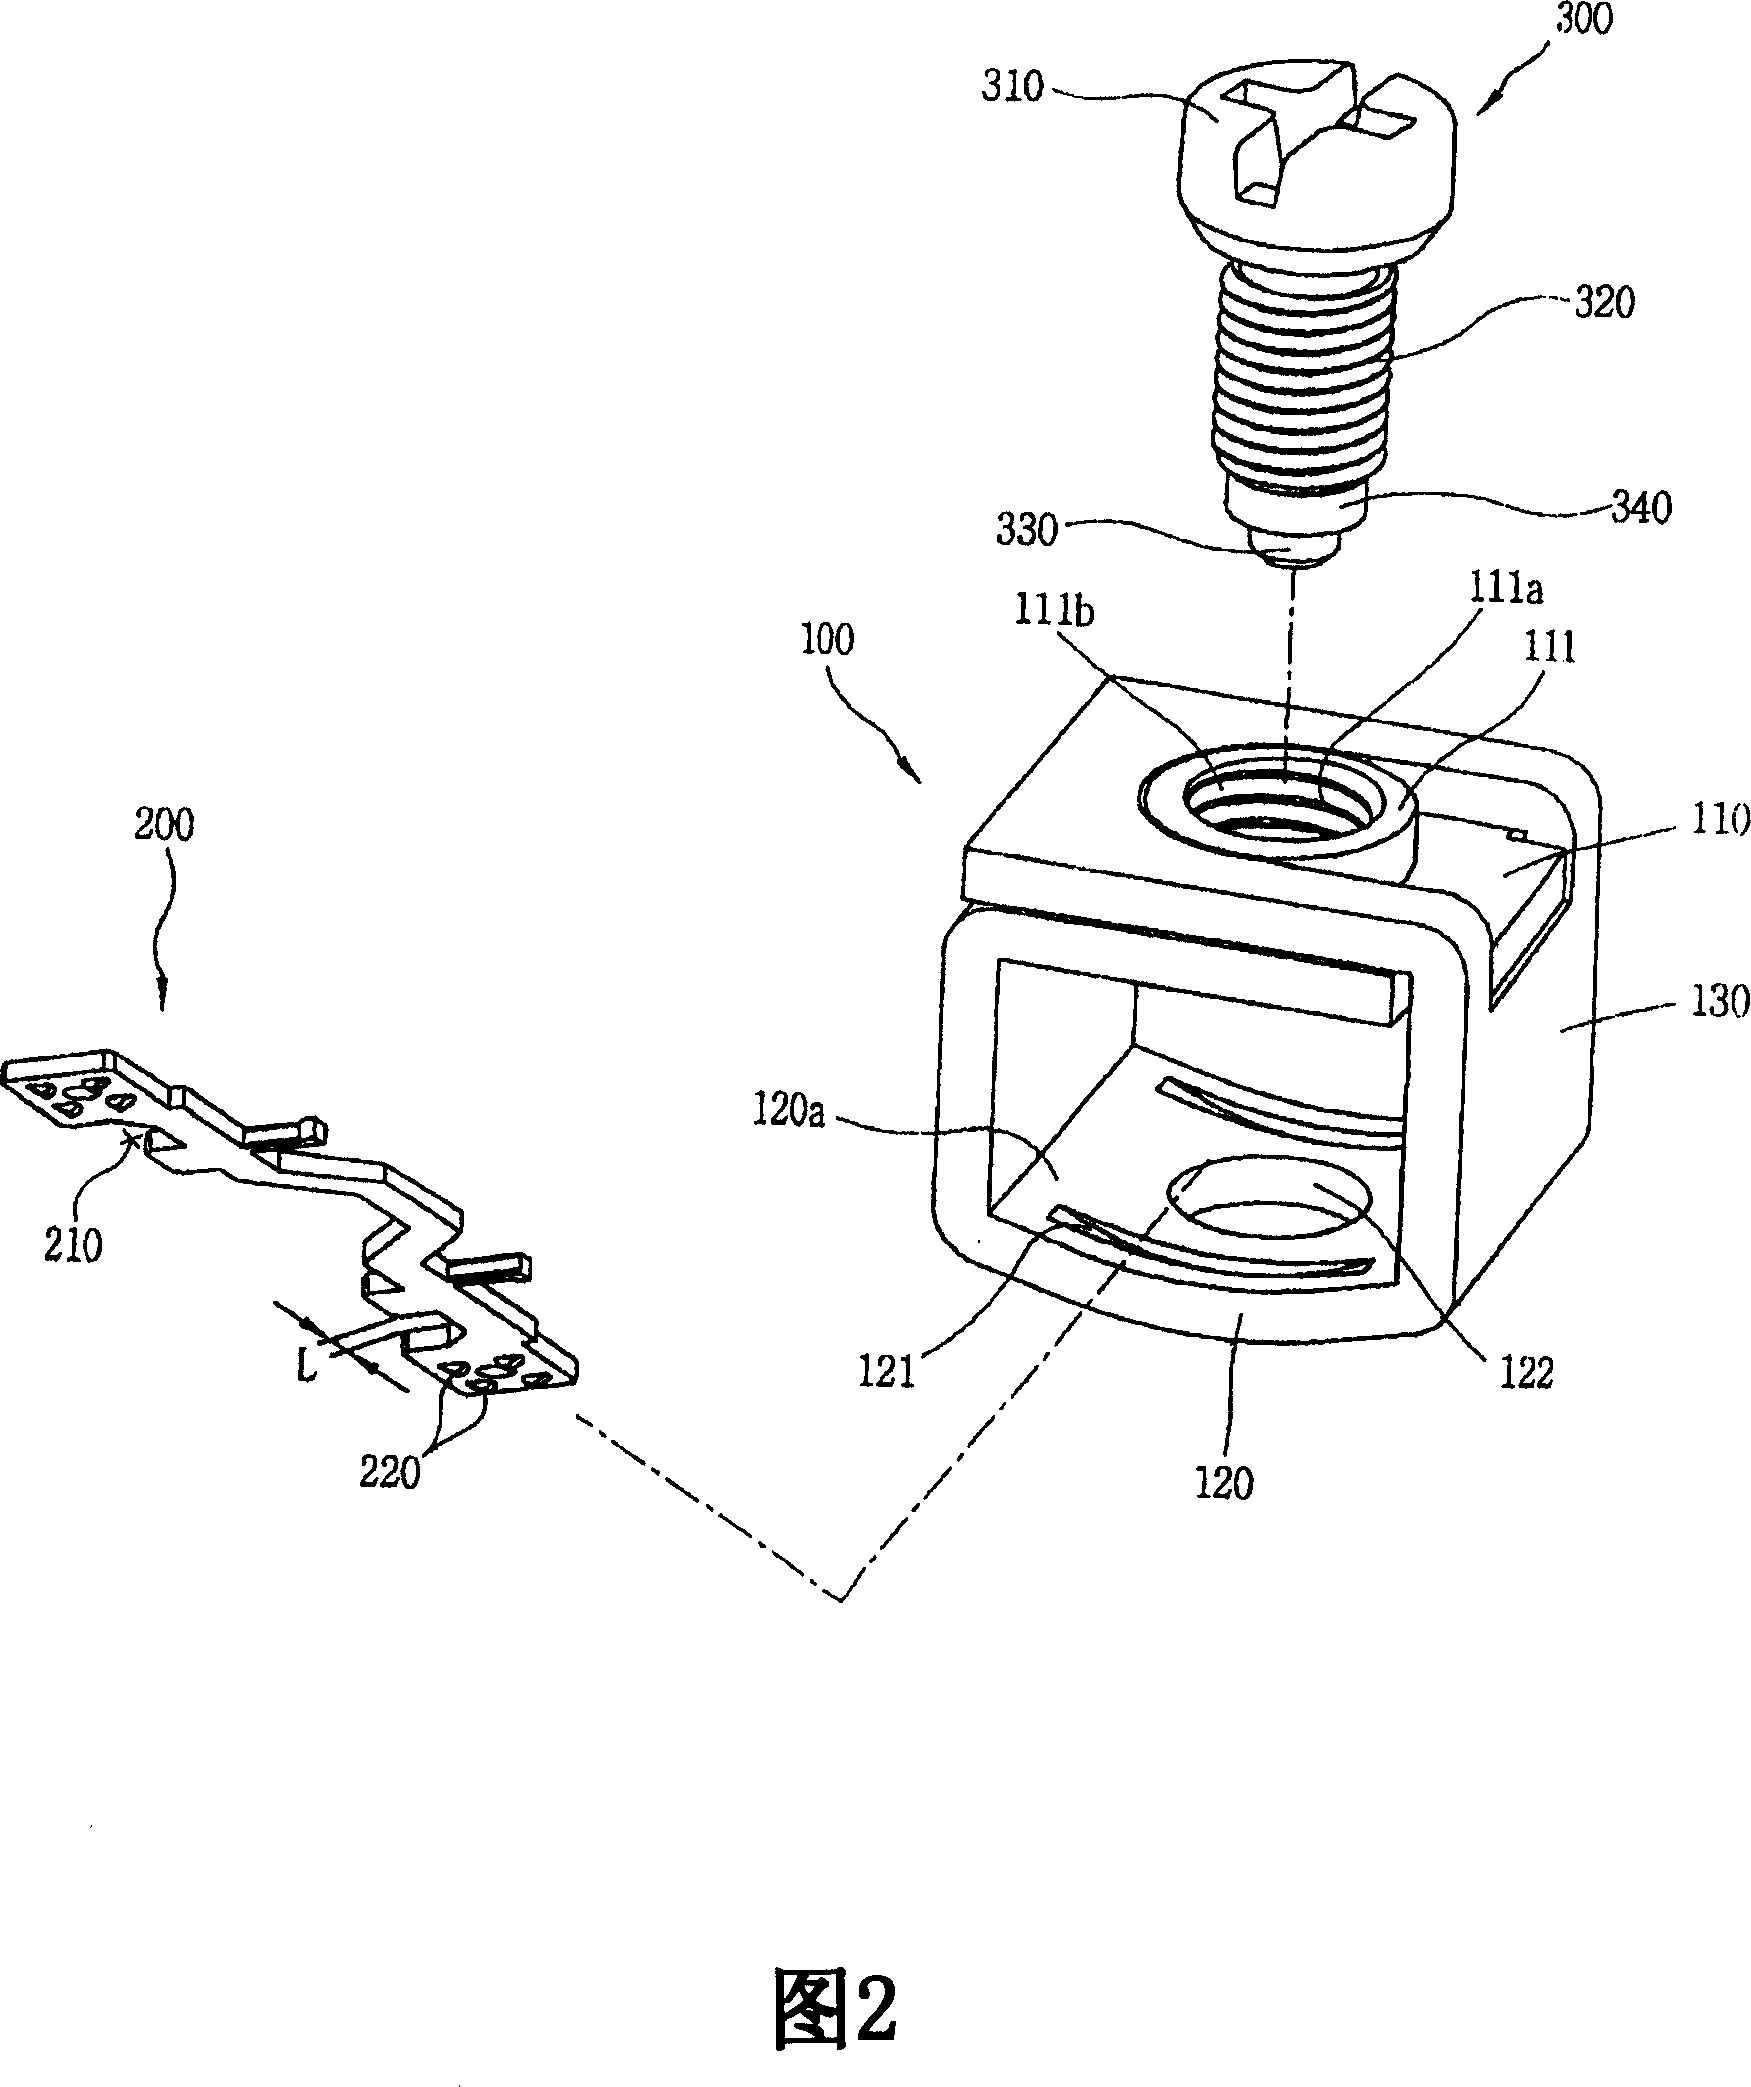 Coil terminal assembly for magnetic contactor